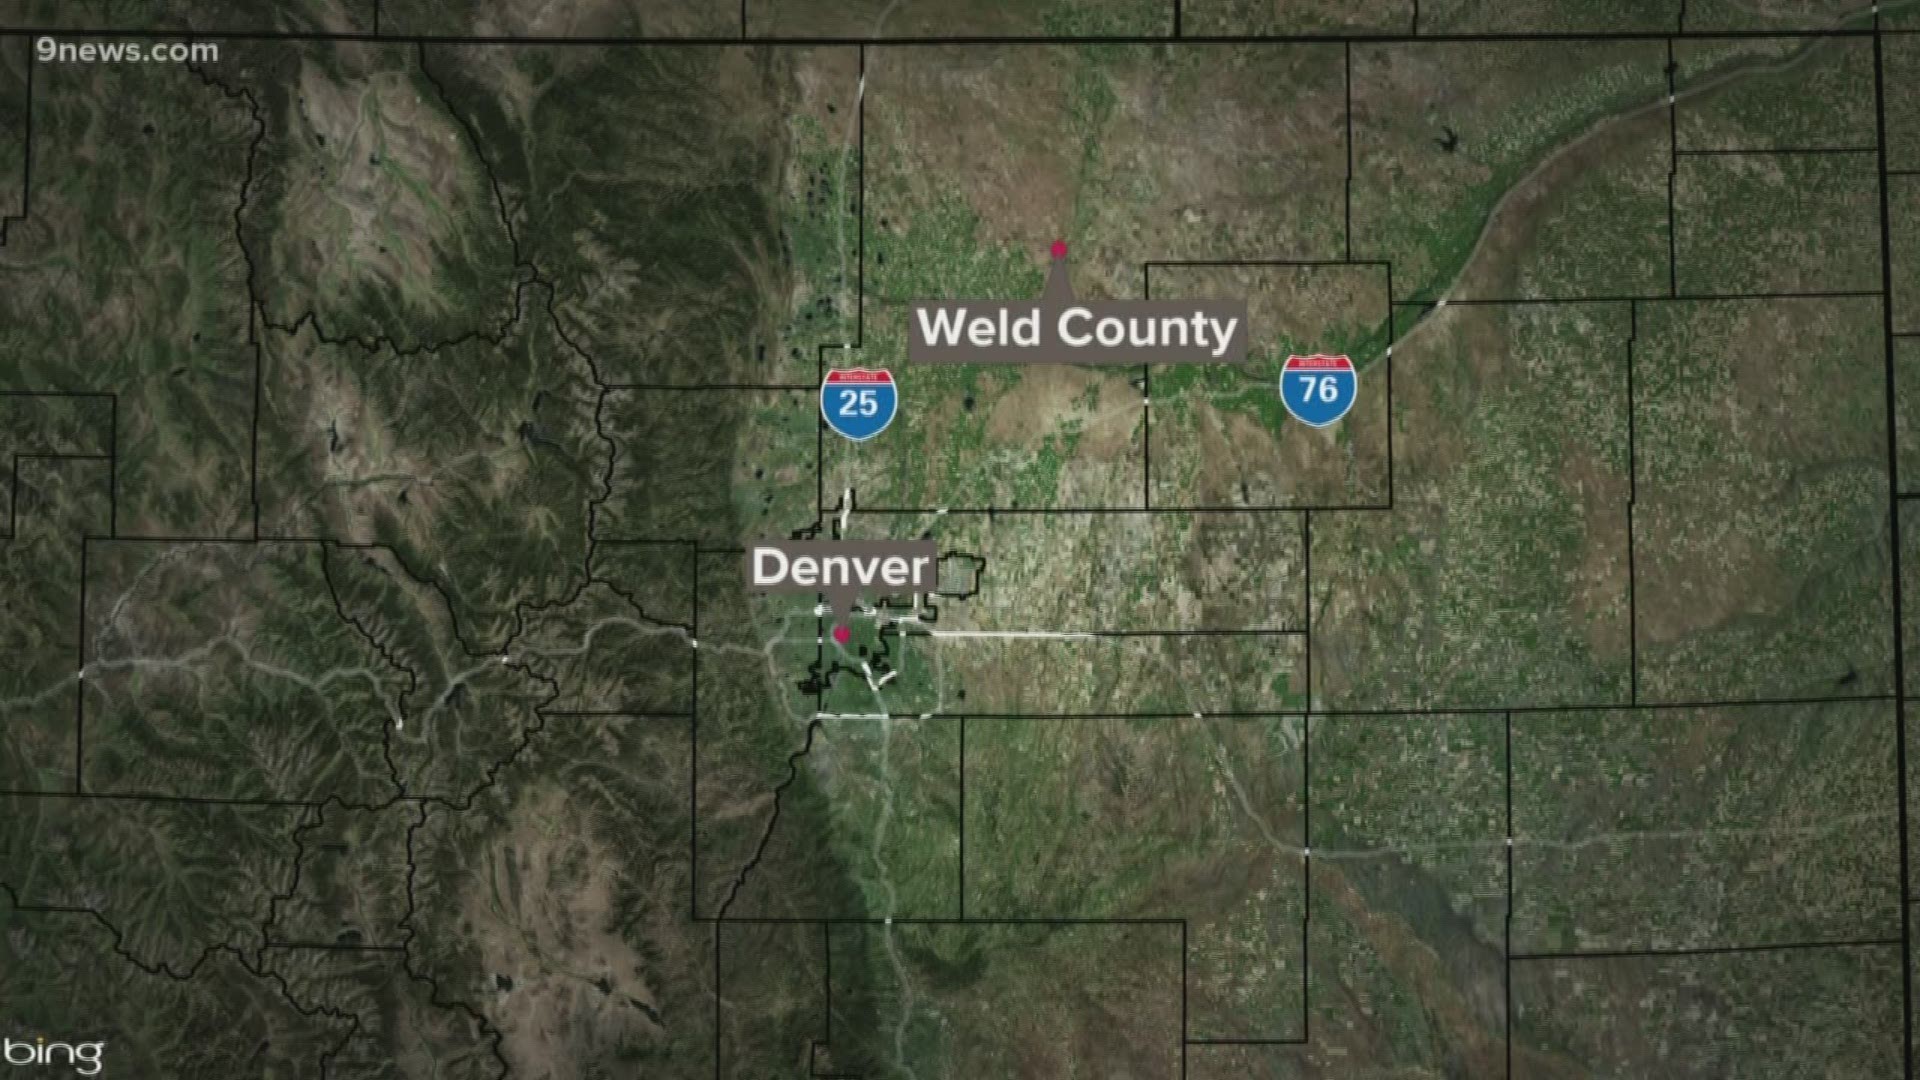 The incident happened in Weld County. Deputies are interviewing the flight crew and suspect.